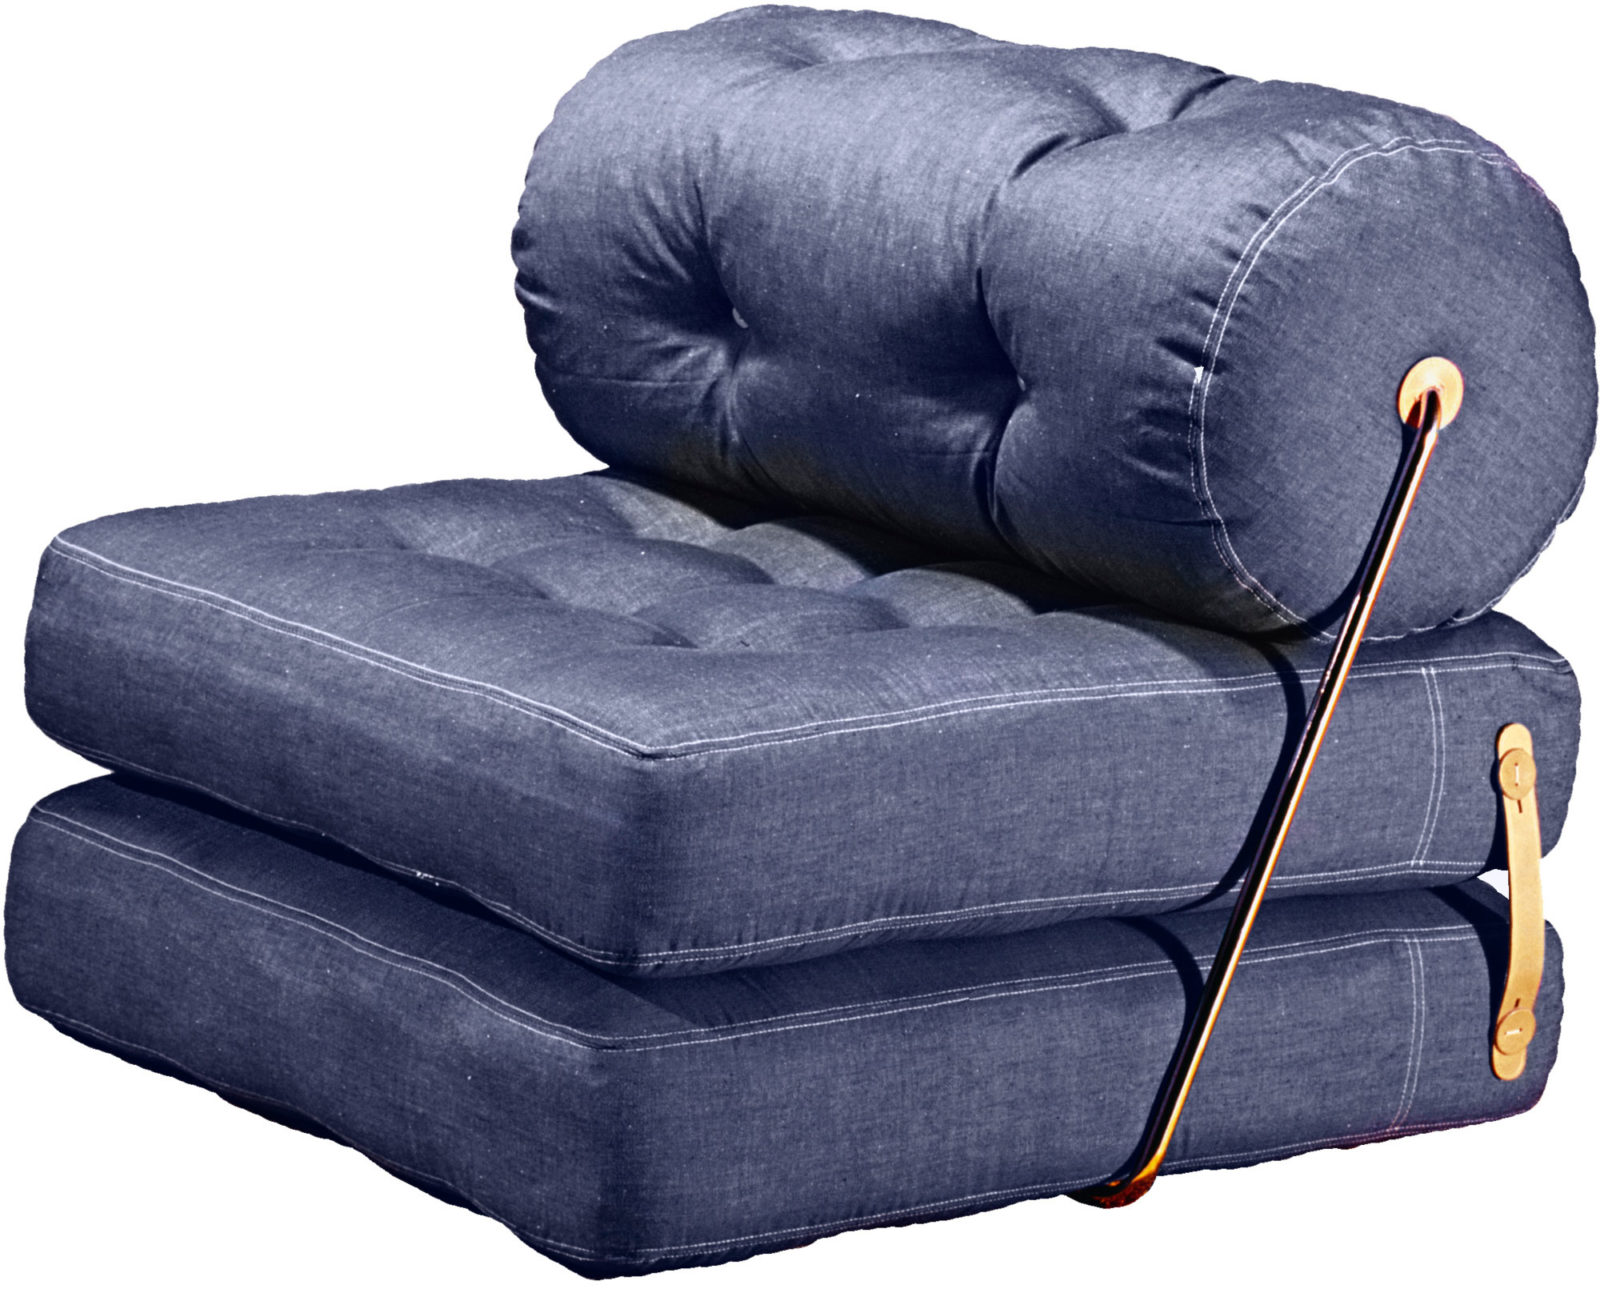 Combined sit, rest and lounge chair comprised of two thick cushions with blue denim covers, TAJT.